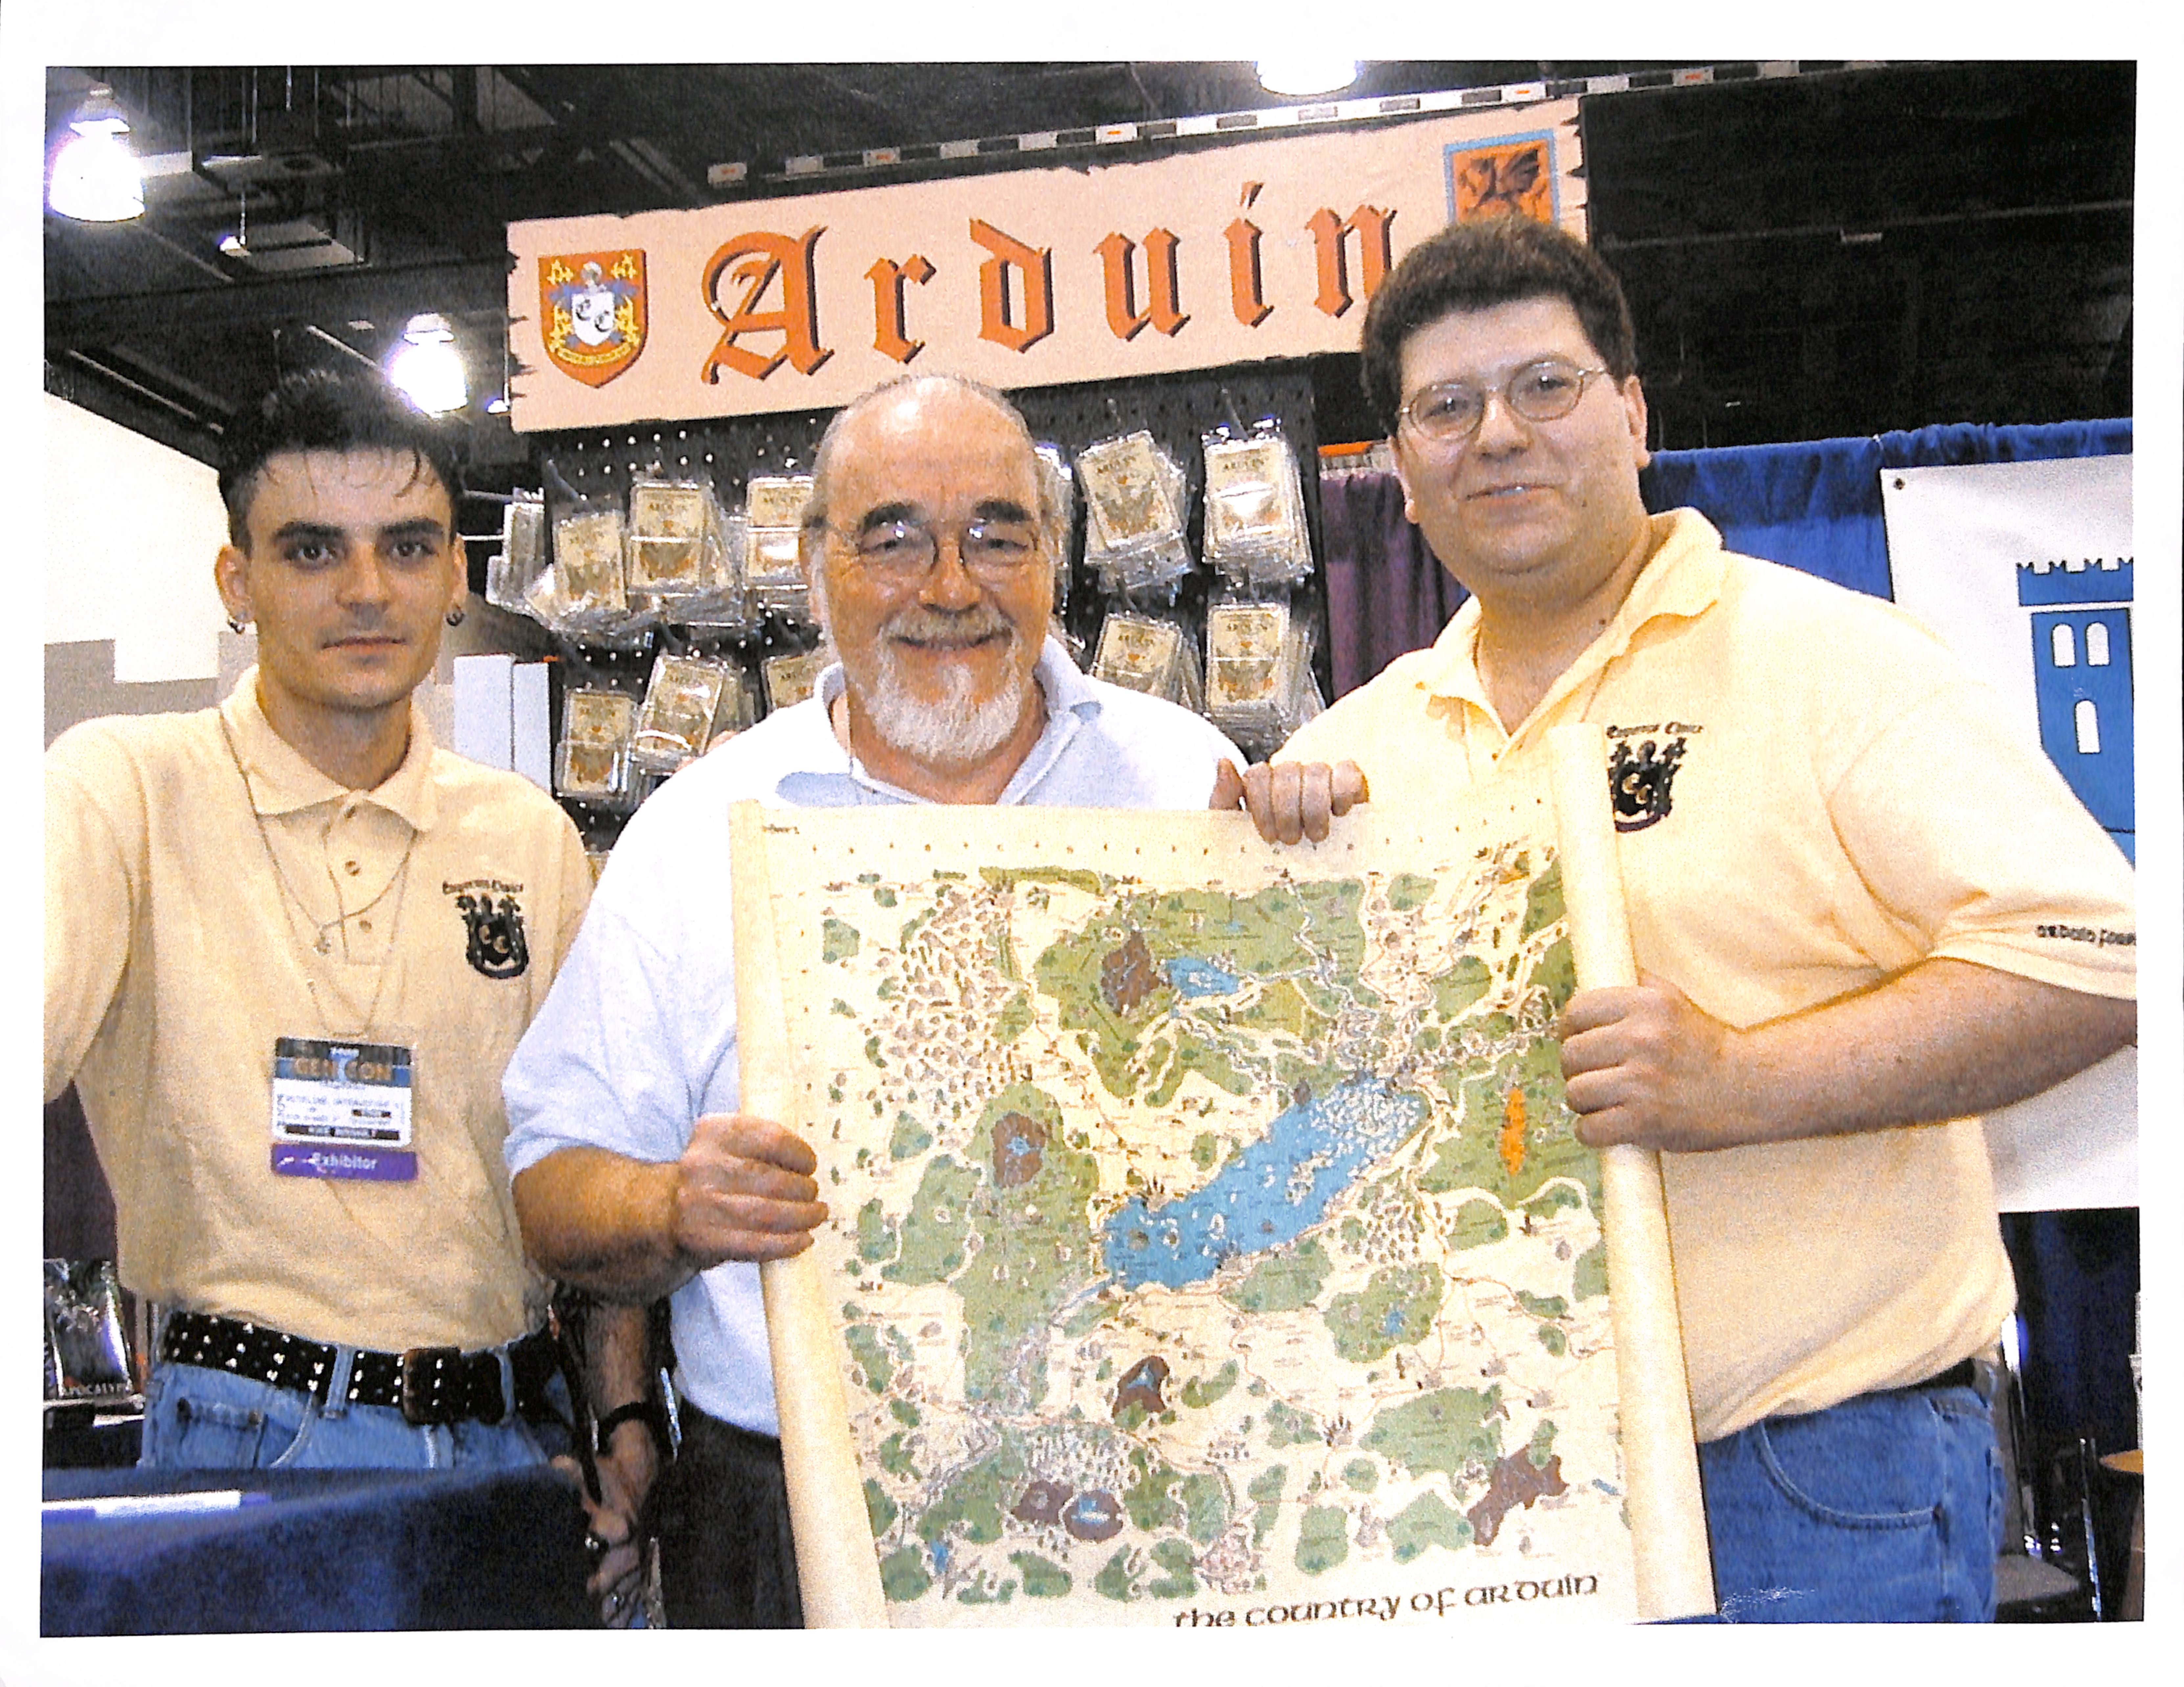 Gary Gygax gencon with George and Mike